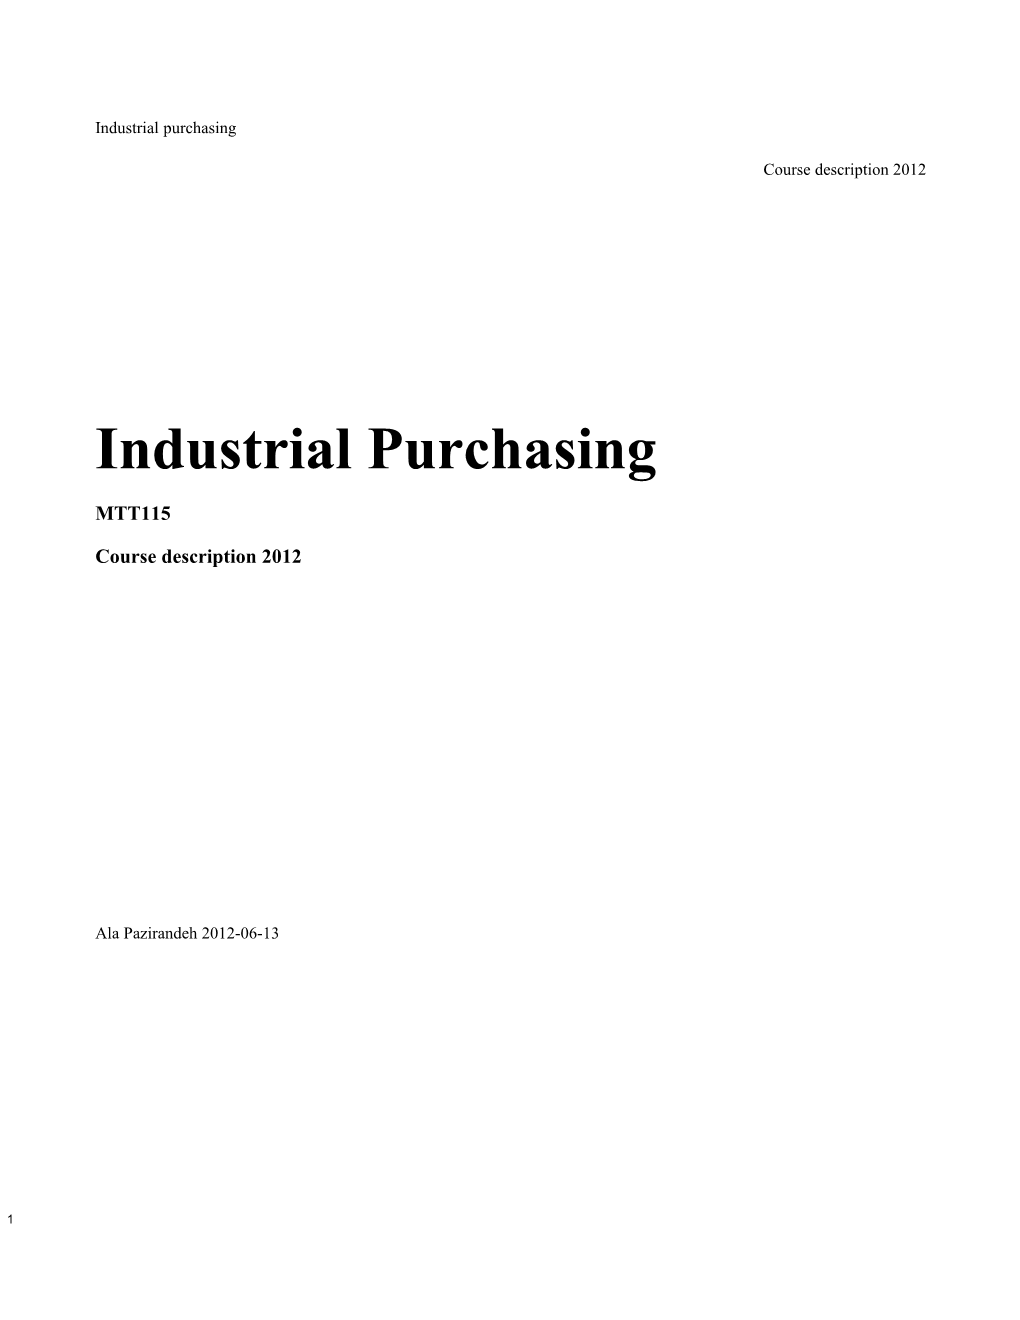 Welcome to the Course in Industrial Purchasing